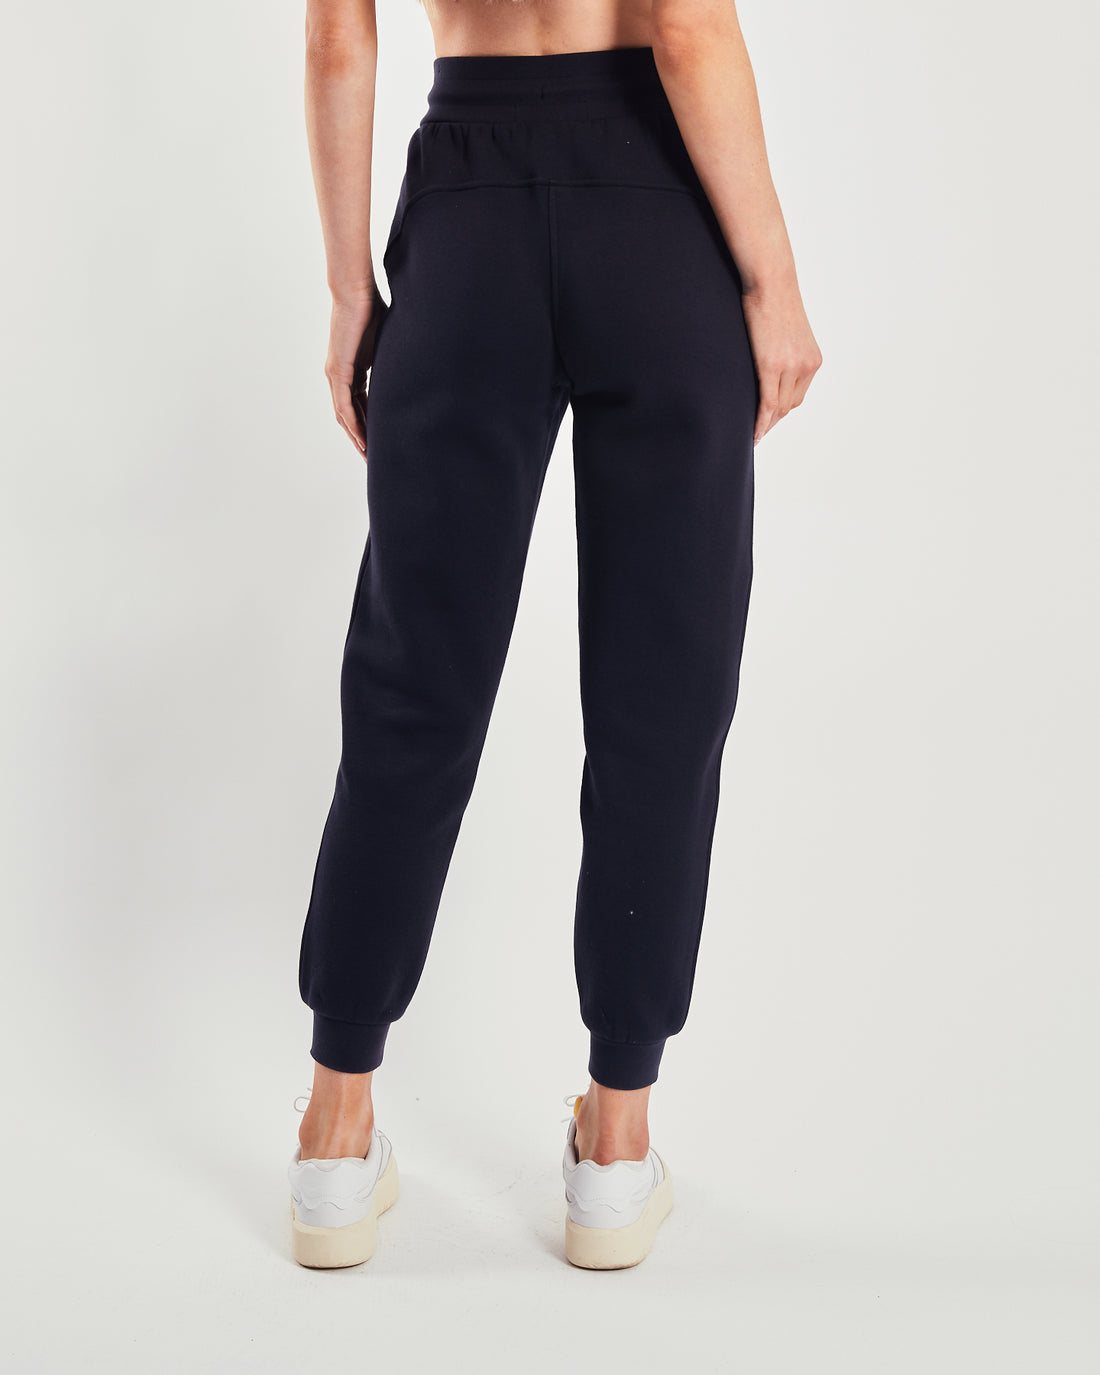 Nat Navy Women's Joggers-Back view